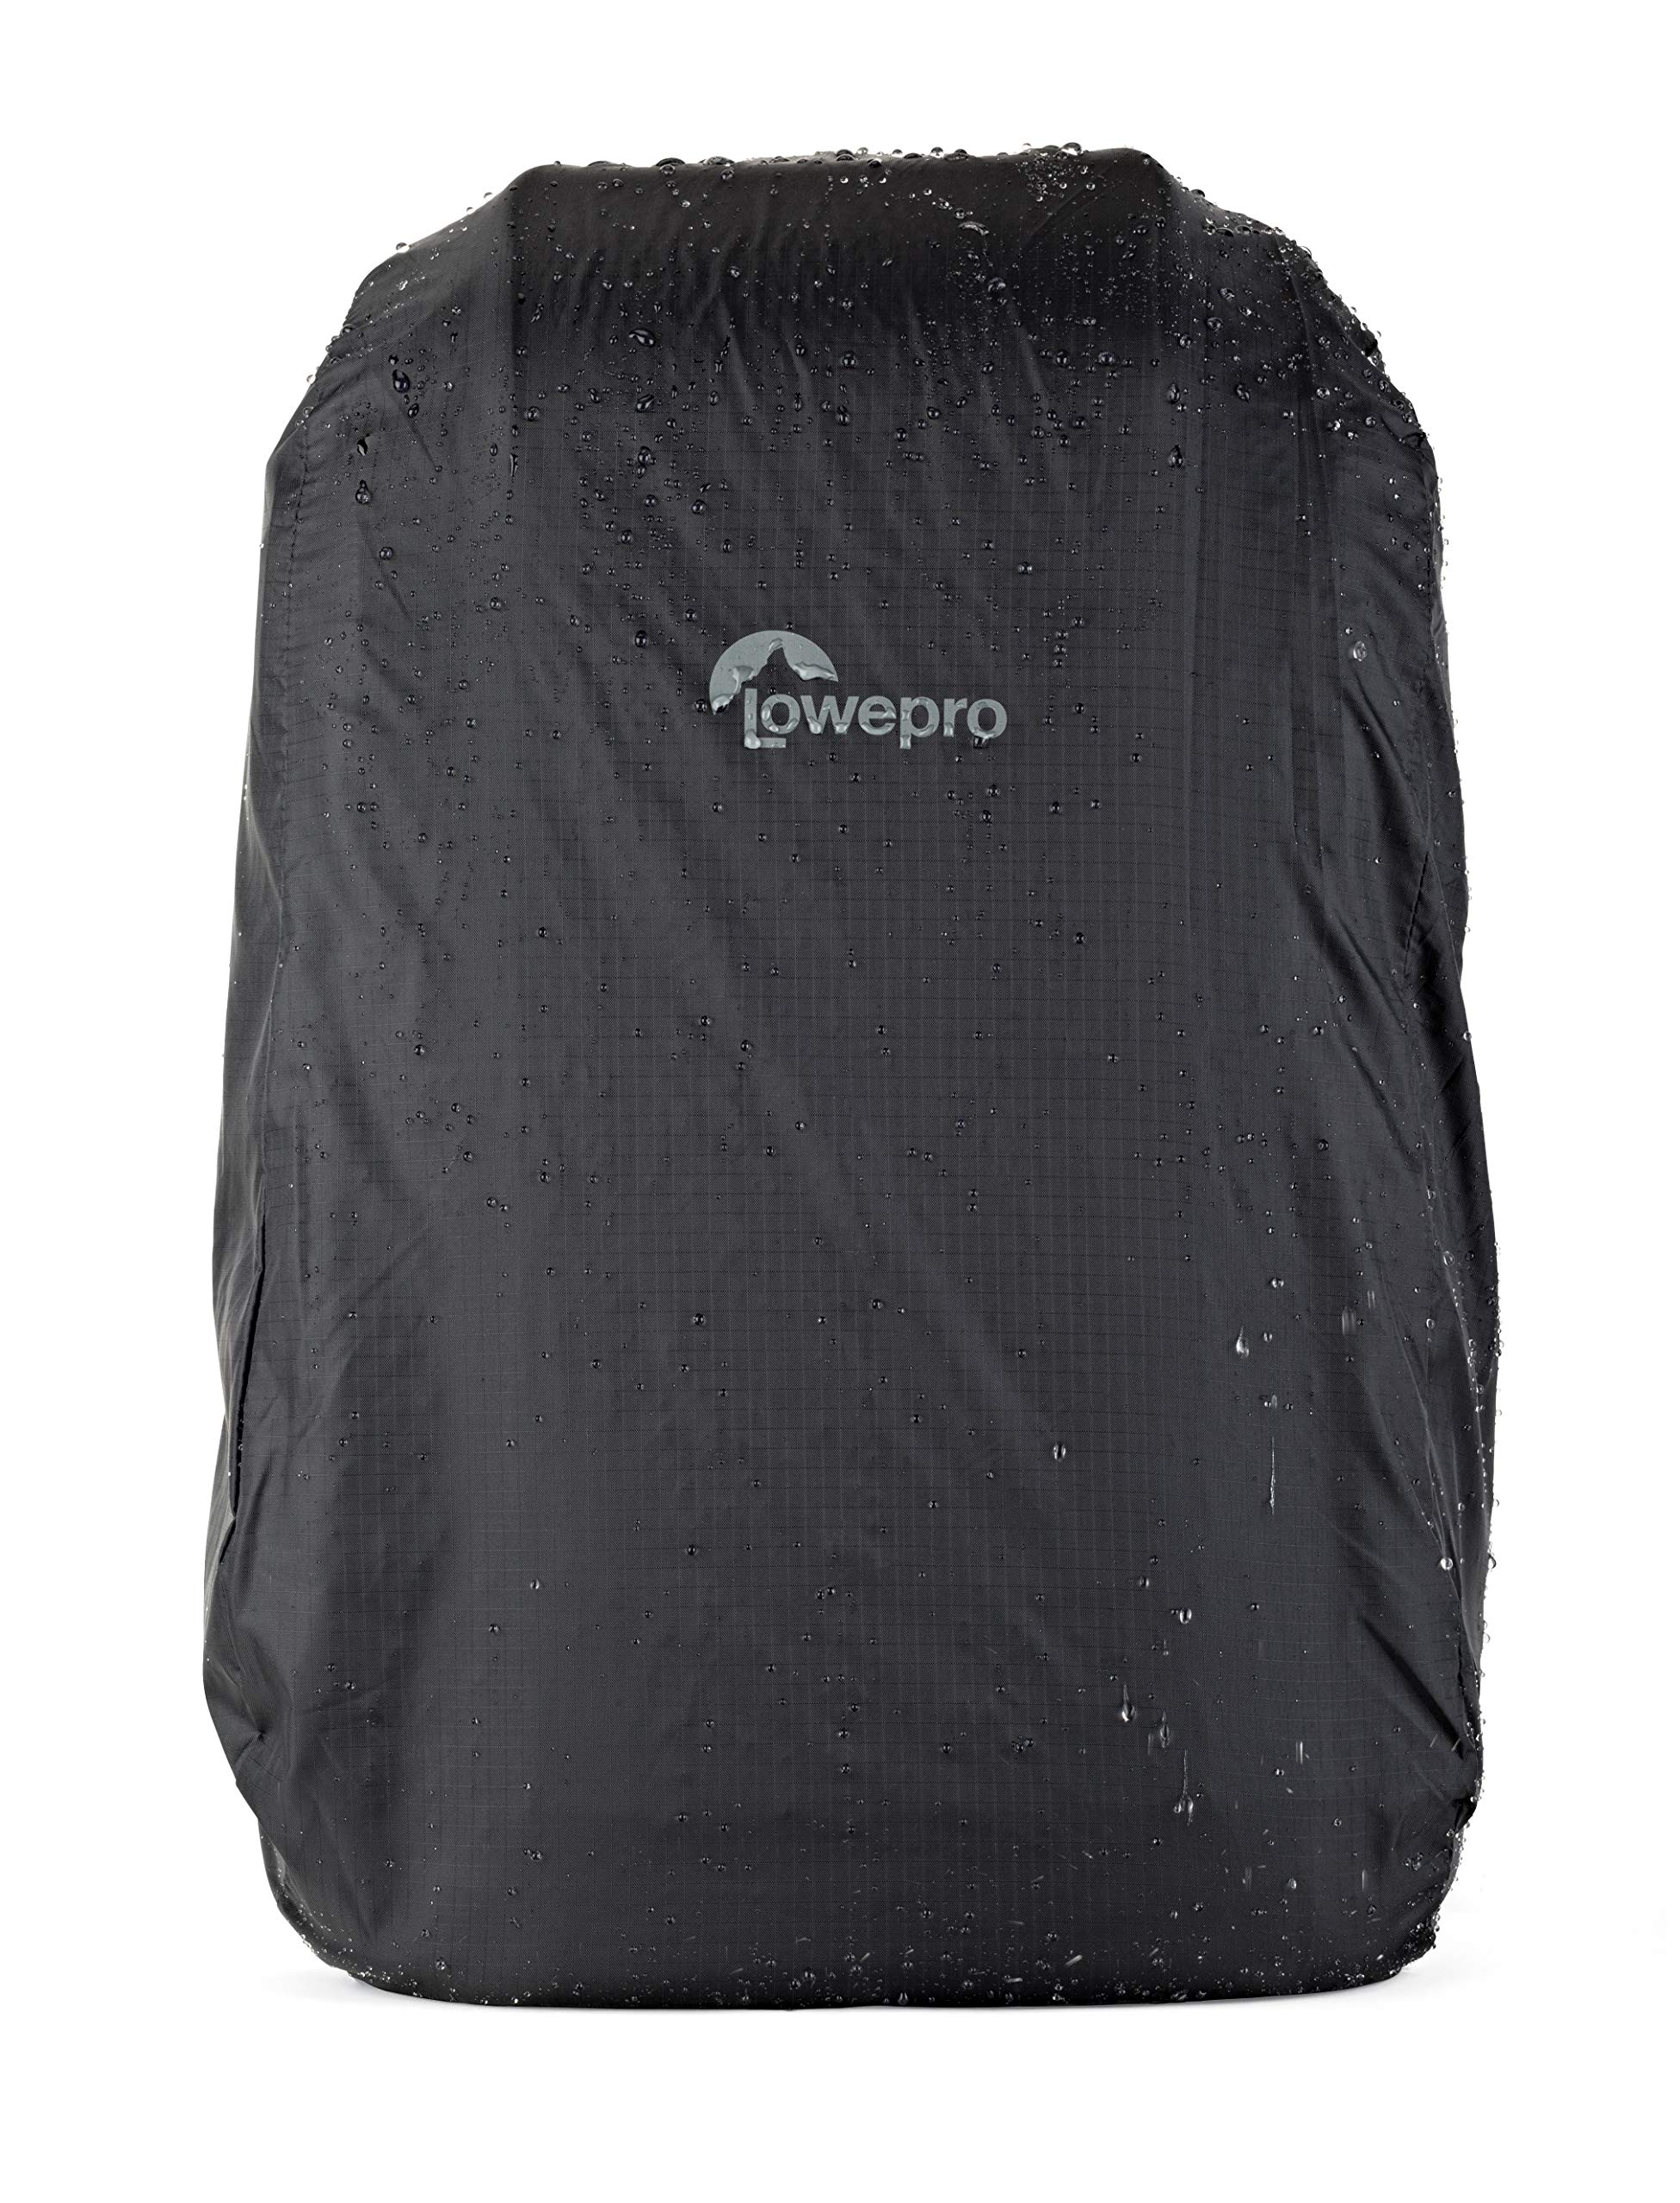 Lowepro ProTactic 450 AW II Black Pro Modular Backpack with All Weather Cover, Camera Bag for Professional Use, for Laptop Up to 15